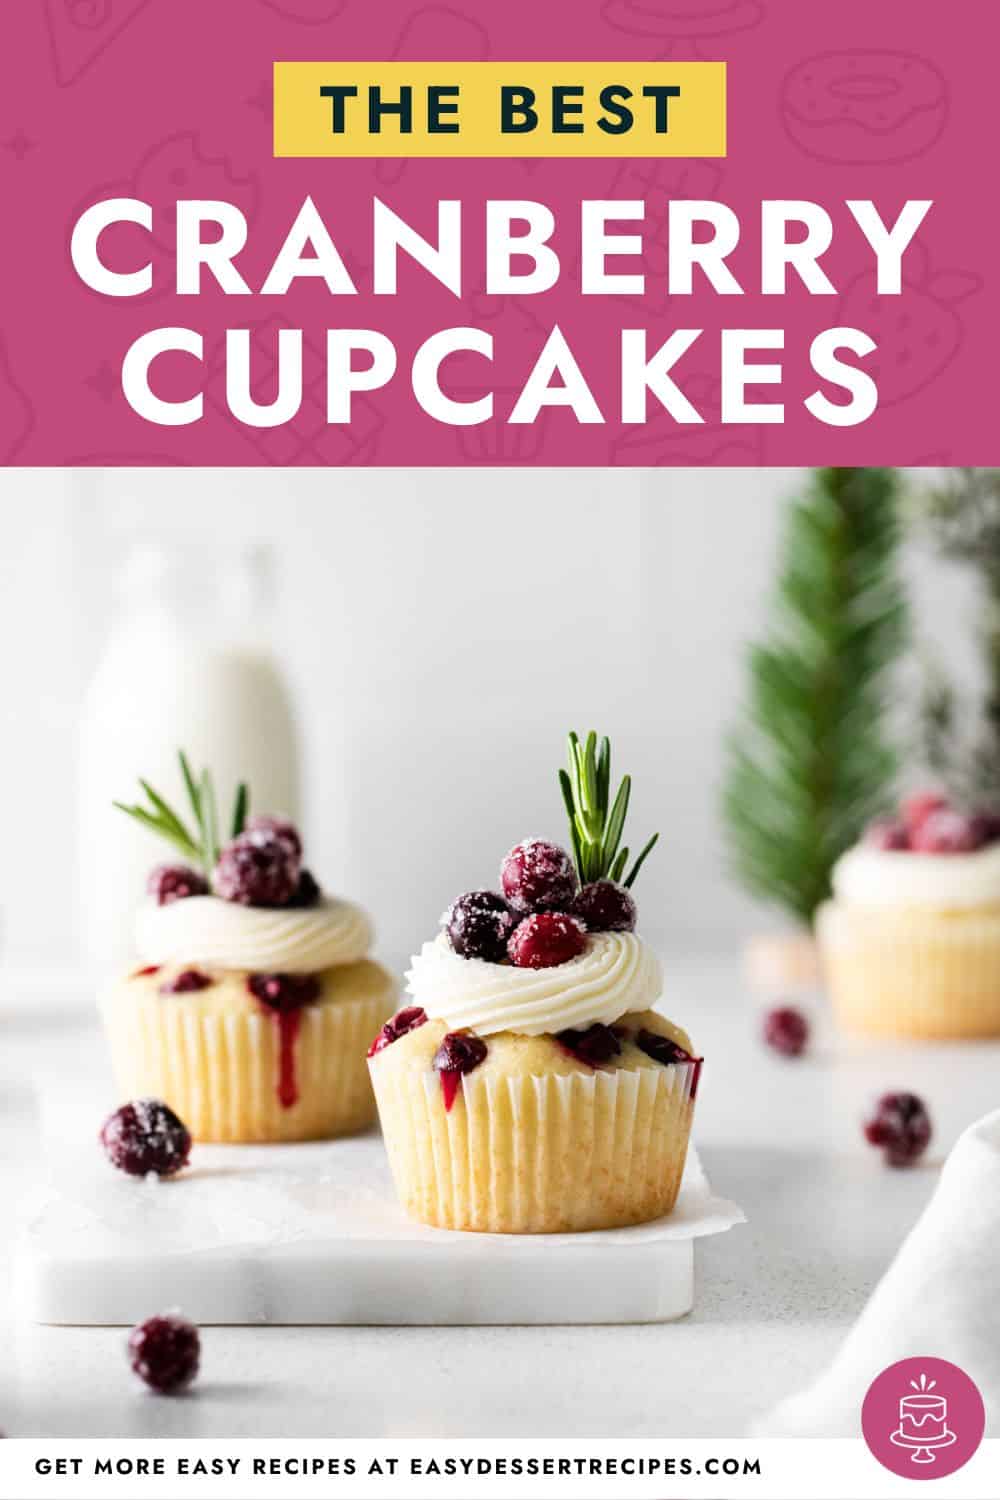 The best cranberry cupcakes.